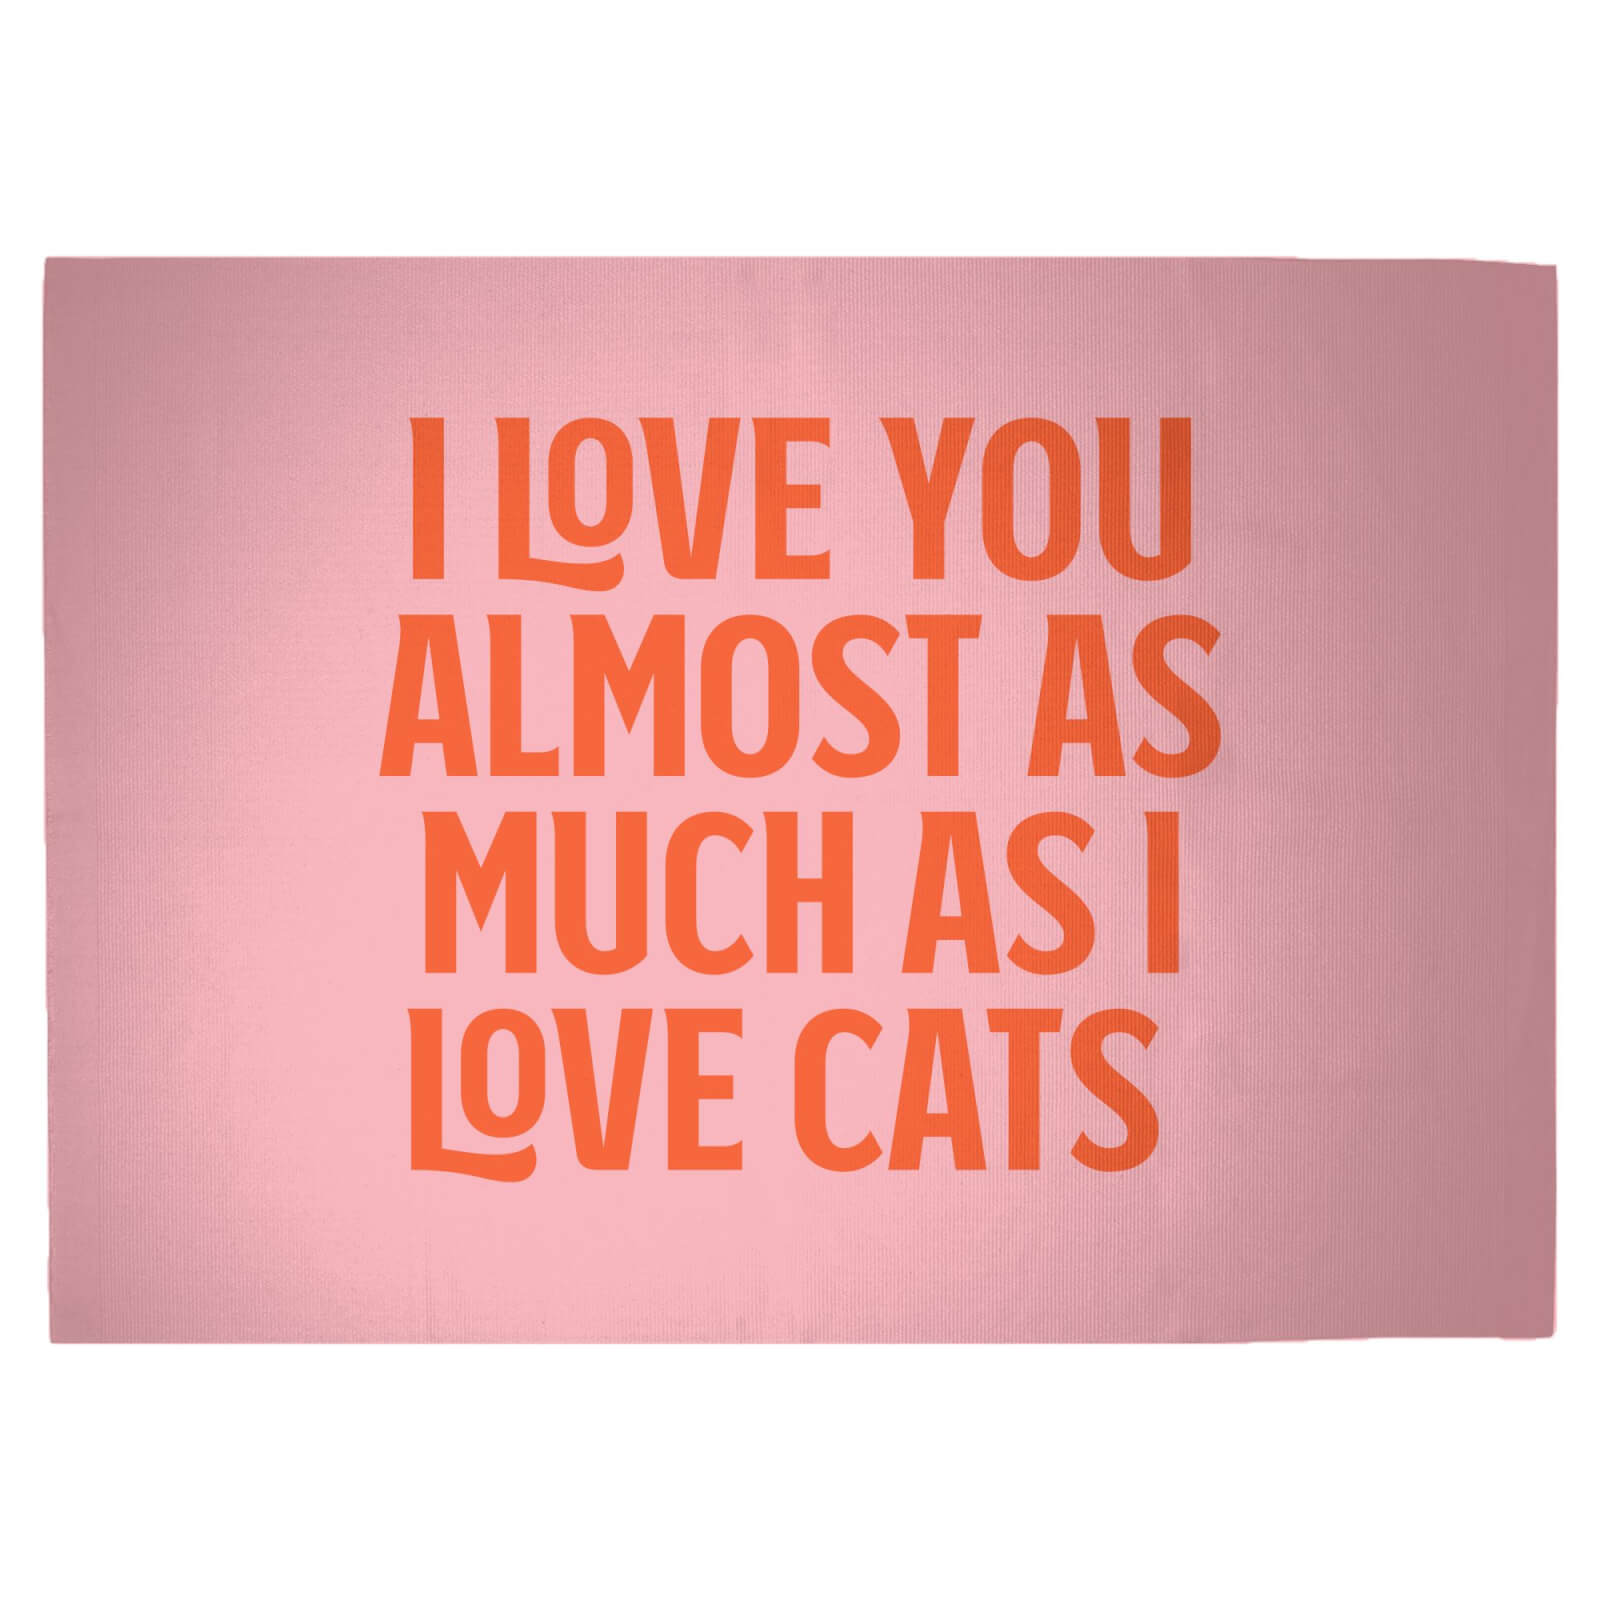 I Love You Almost As Much As I Love Cats Woven Rug - Large